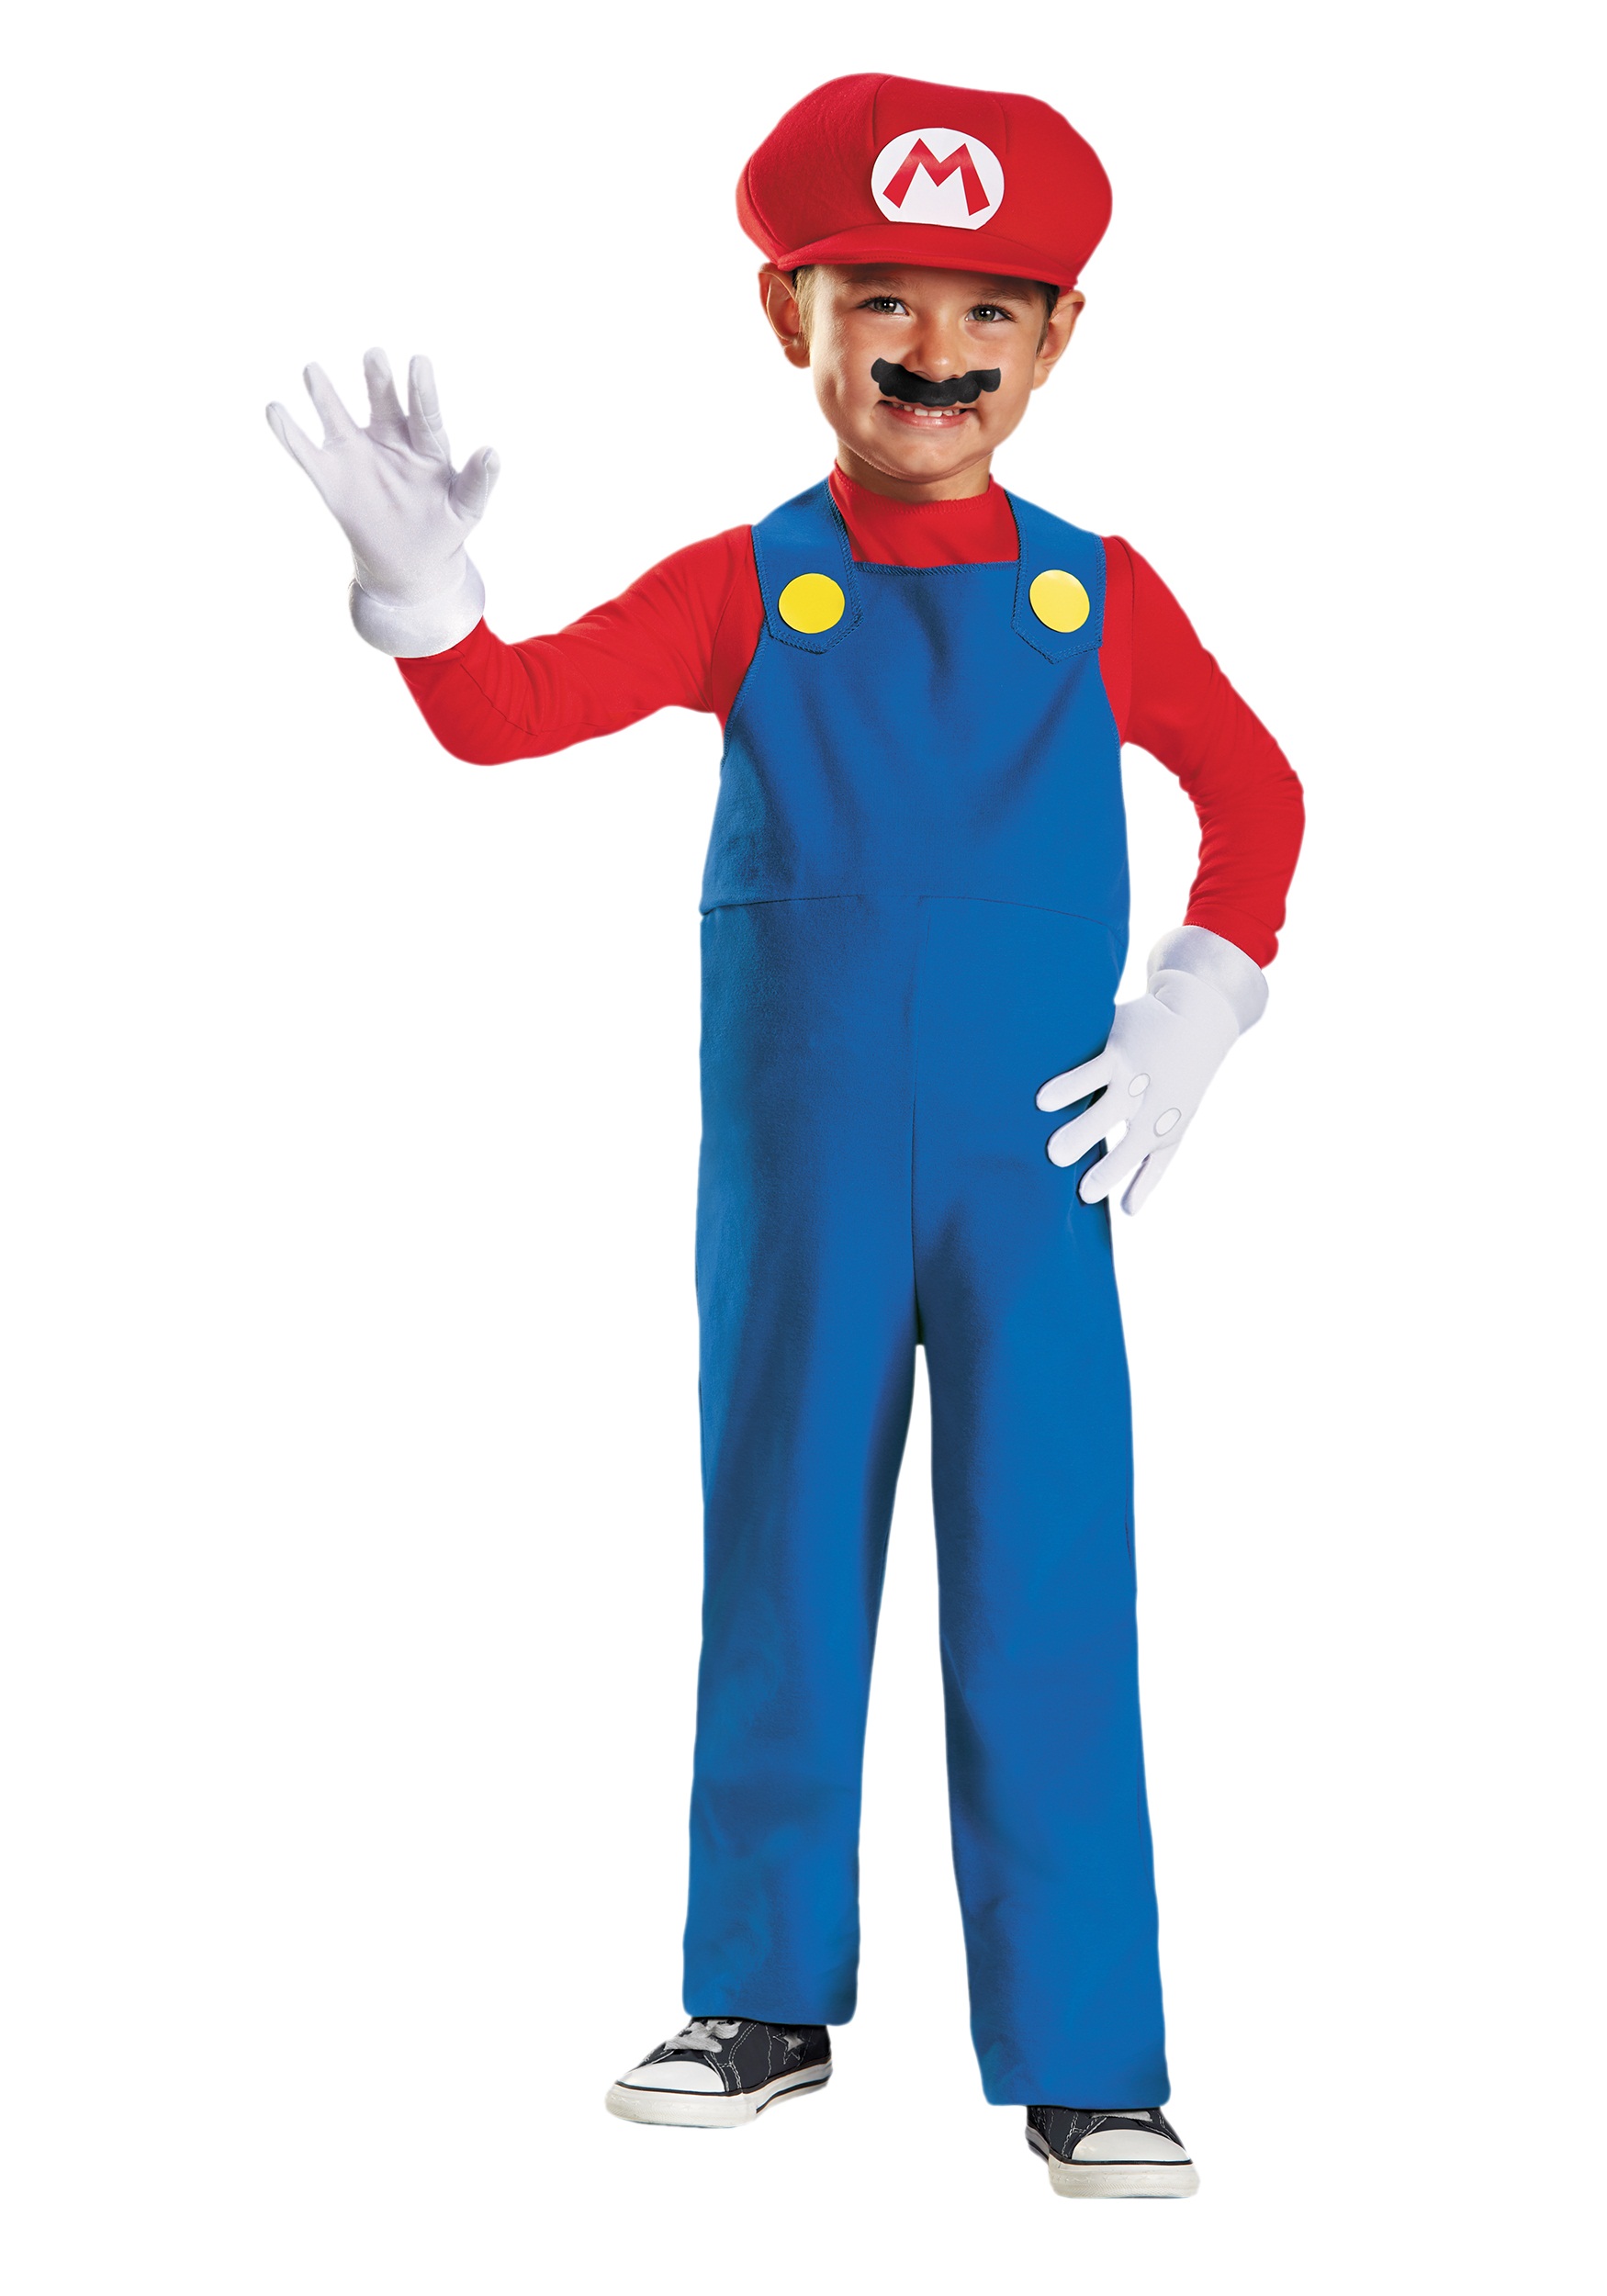 Photos - Fancy Dress MARIO Disguise  Costume for Toddlers Red/Blue DI73682 